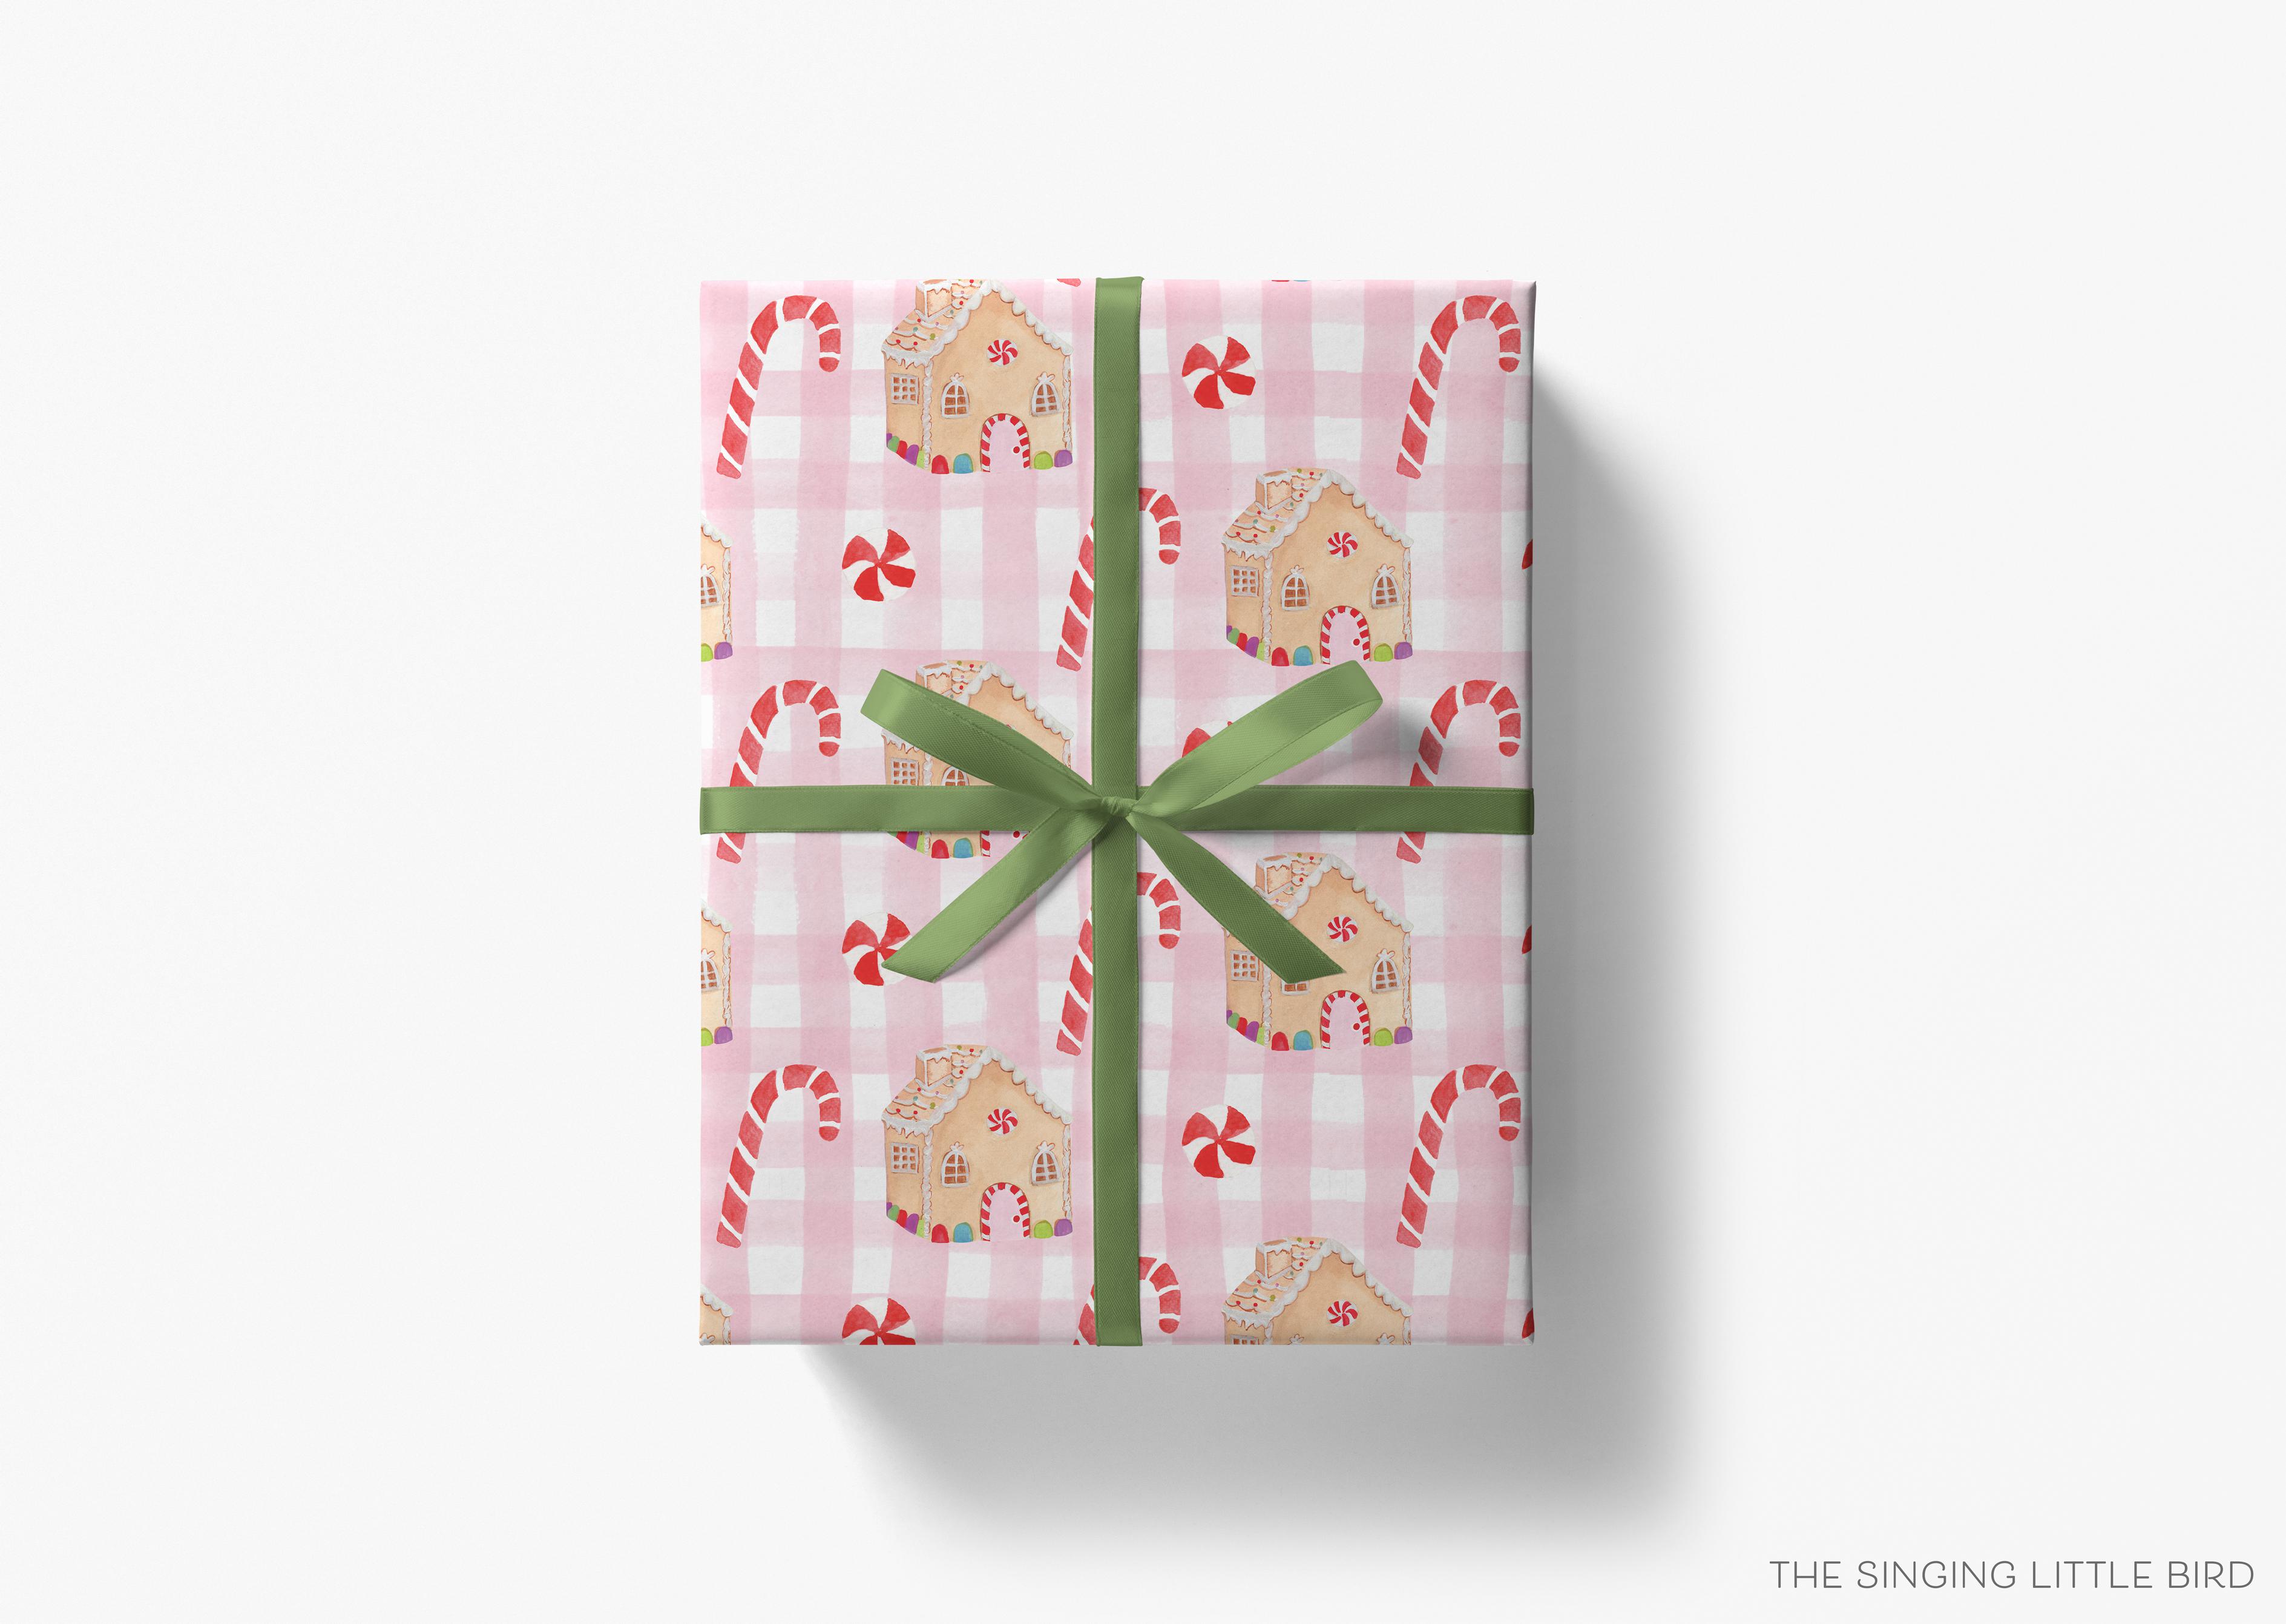 Pink Gingerbread Christmas Gift Wrap-This matte finish gift wrap features our hand-painted watercolor gingerbread houses and candy canes. It makes a perfect wrapping paper for a holiday present. -The Singing Little Bird